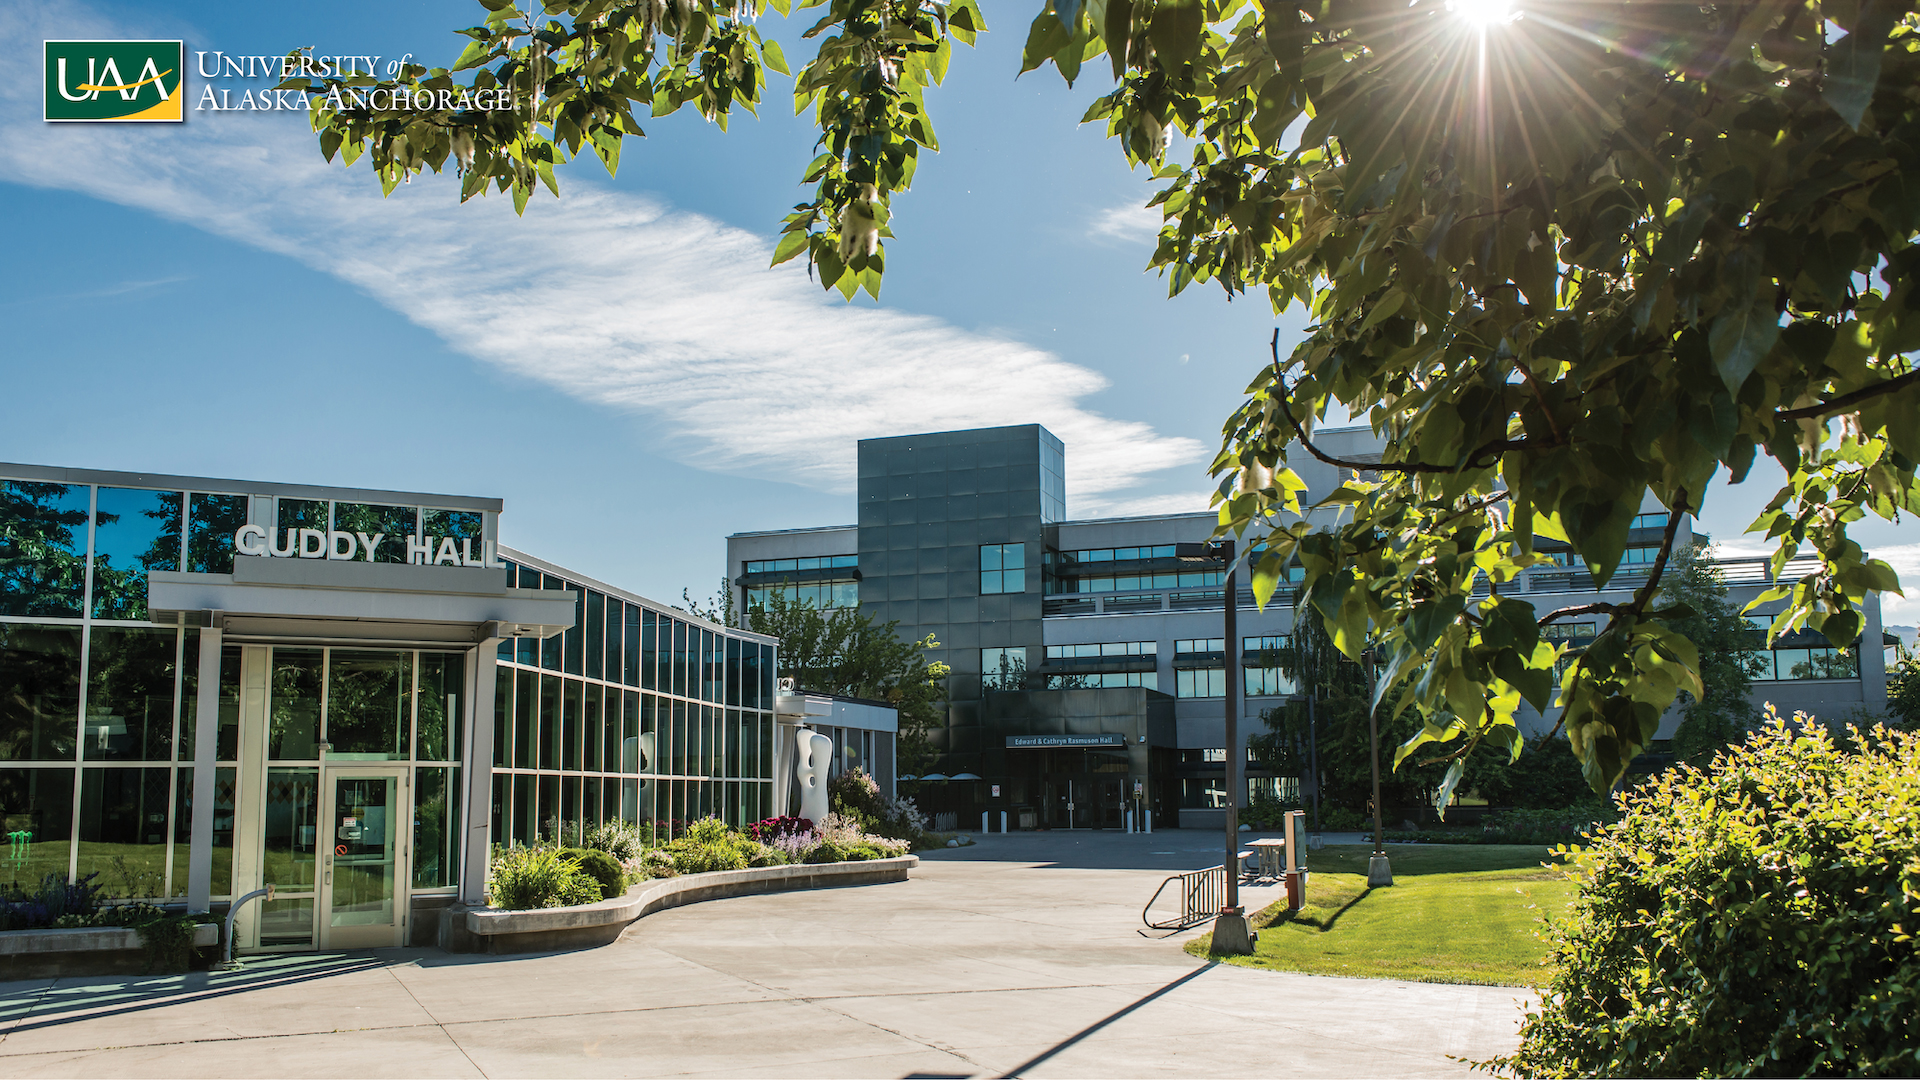 Bring campus to you with Zoom backgrounds | News | University of Alaska Anchorage